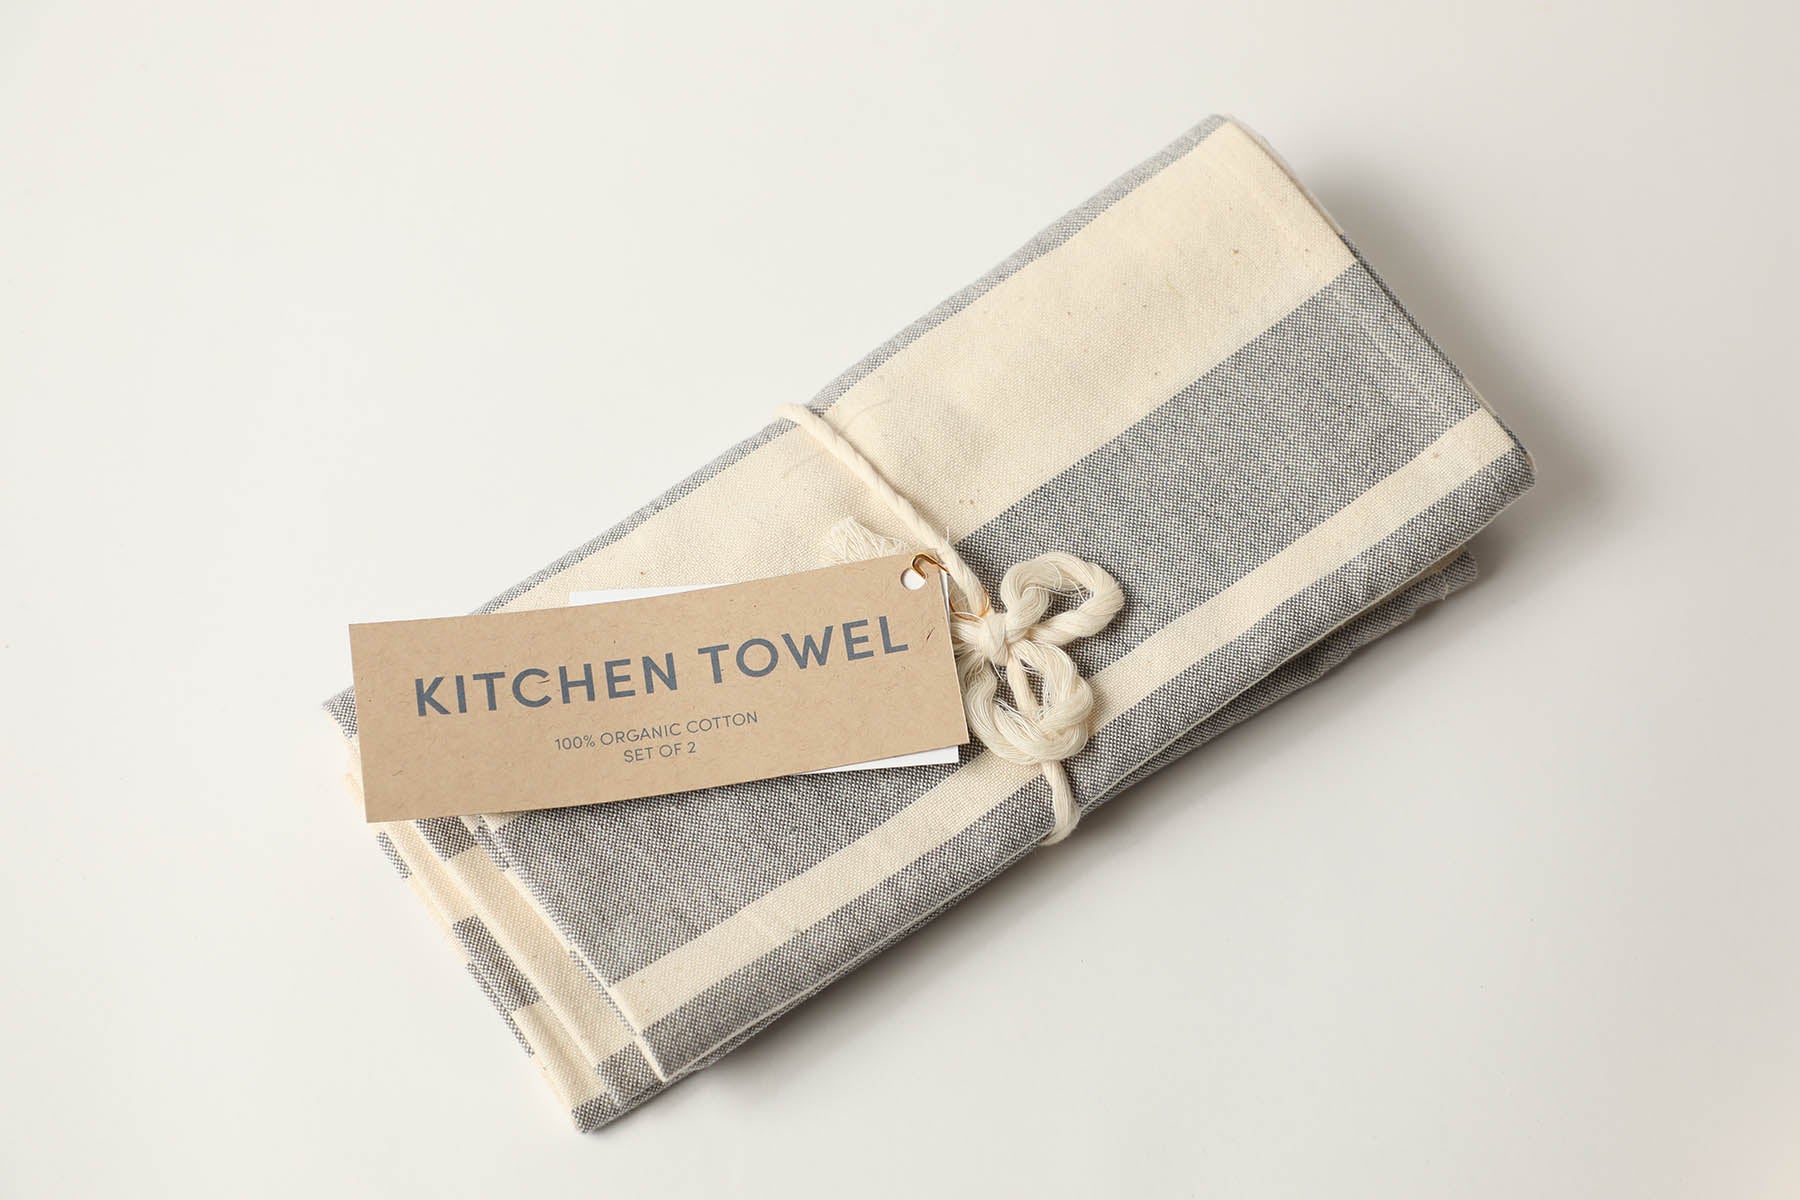 Kitchen Towels - Grey Broad Stripe, Set of 2, Gives to the Land Institute